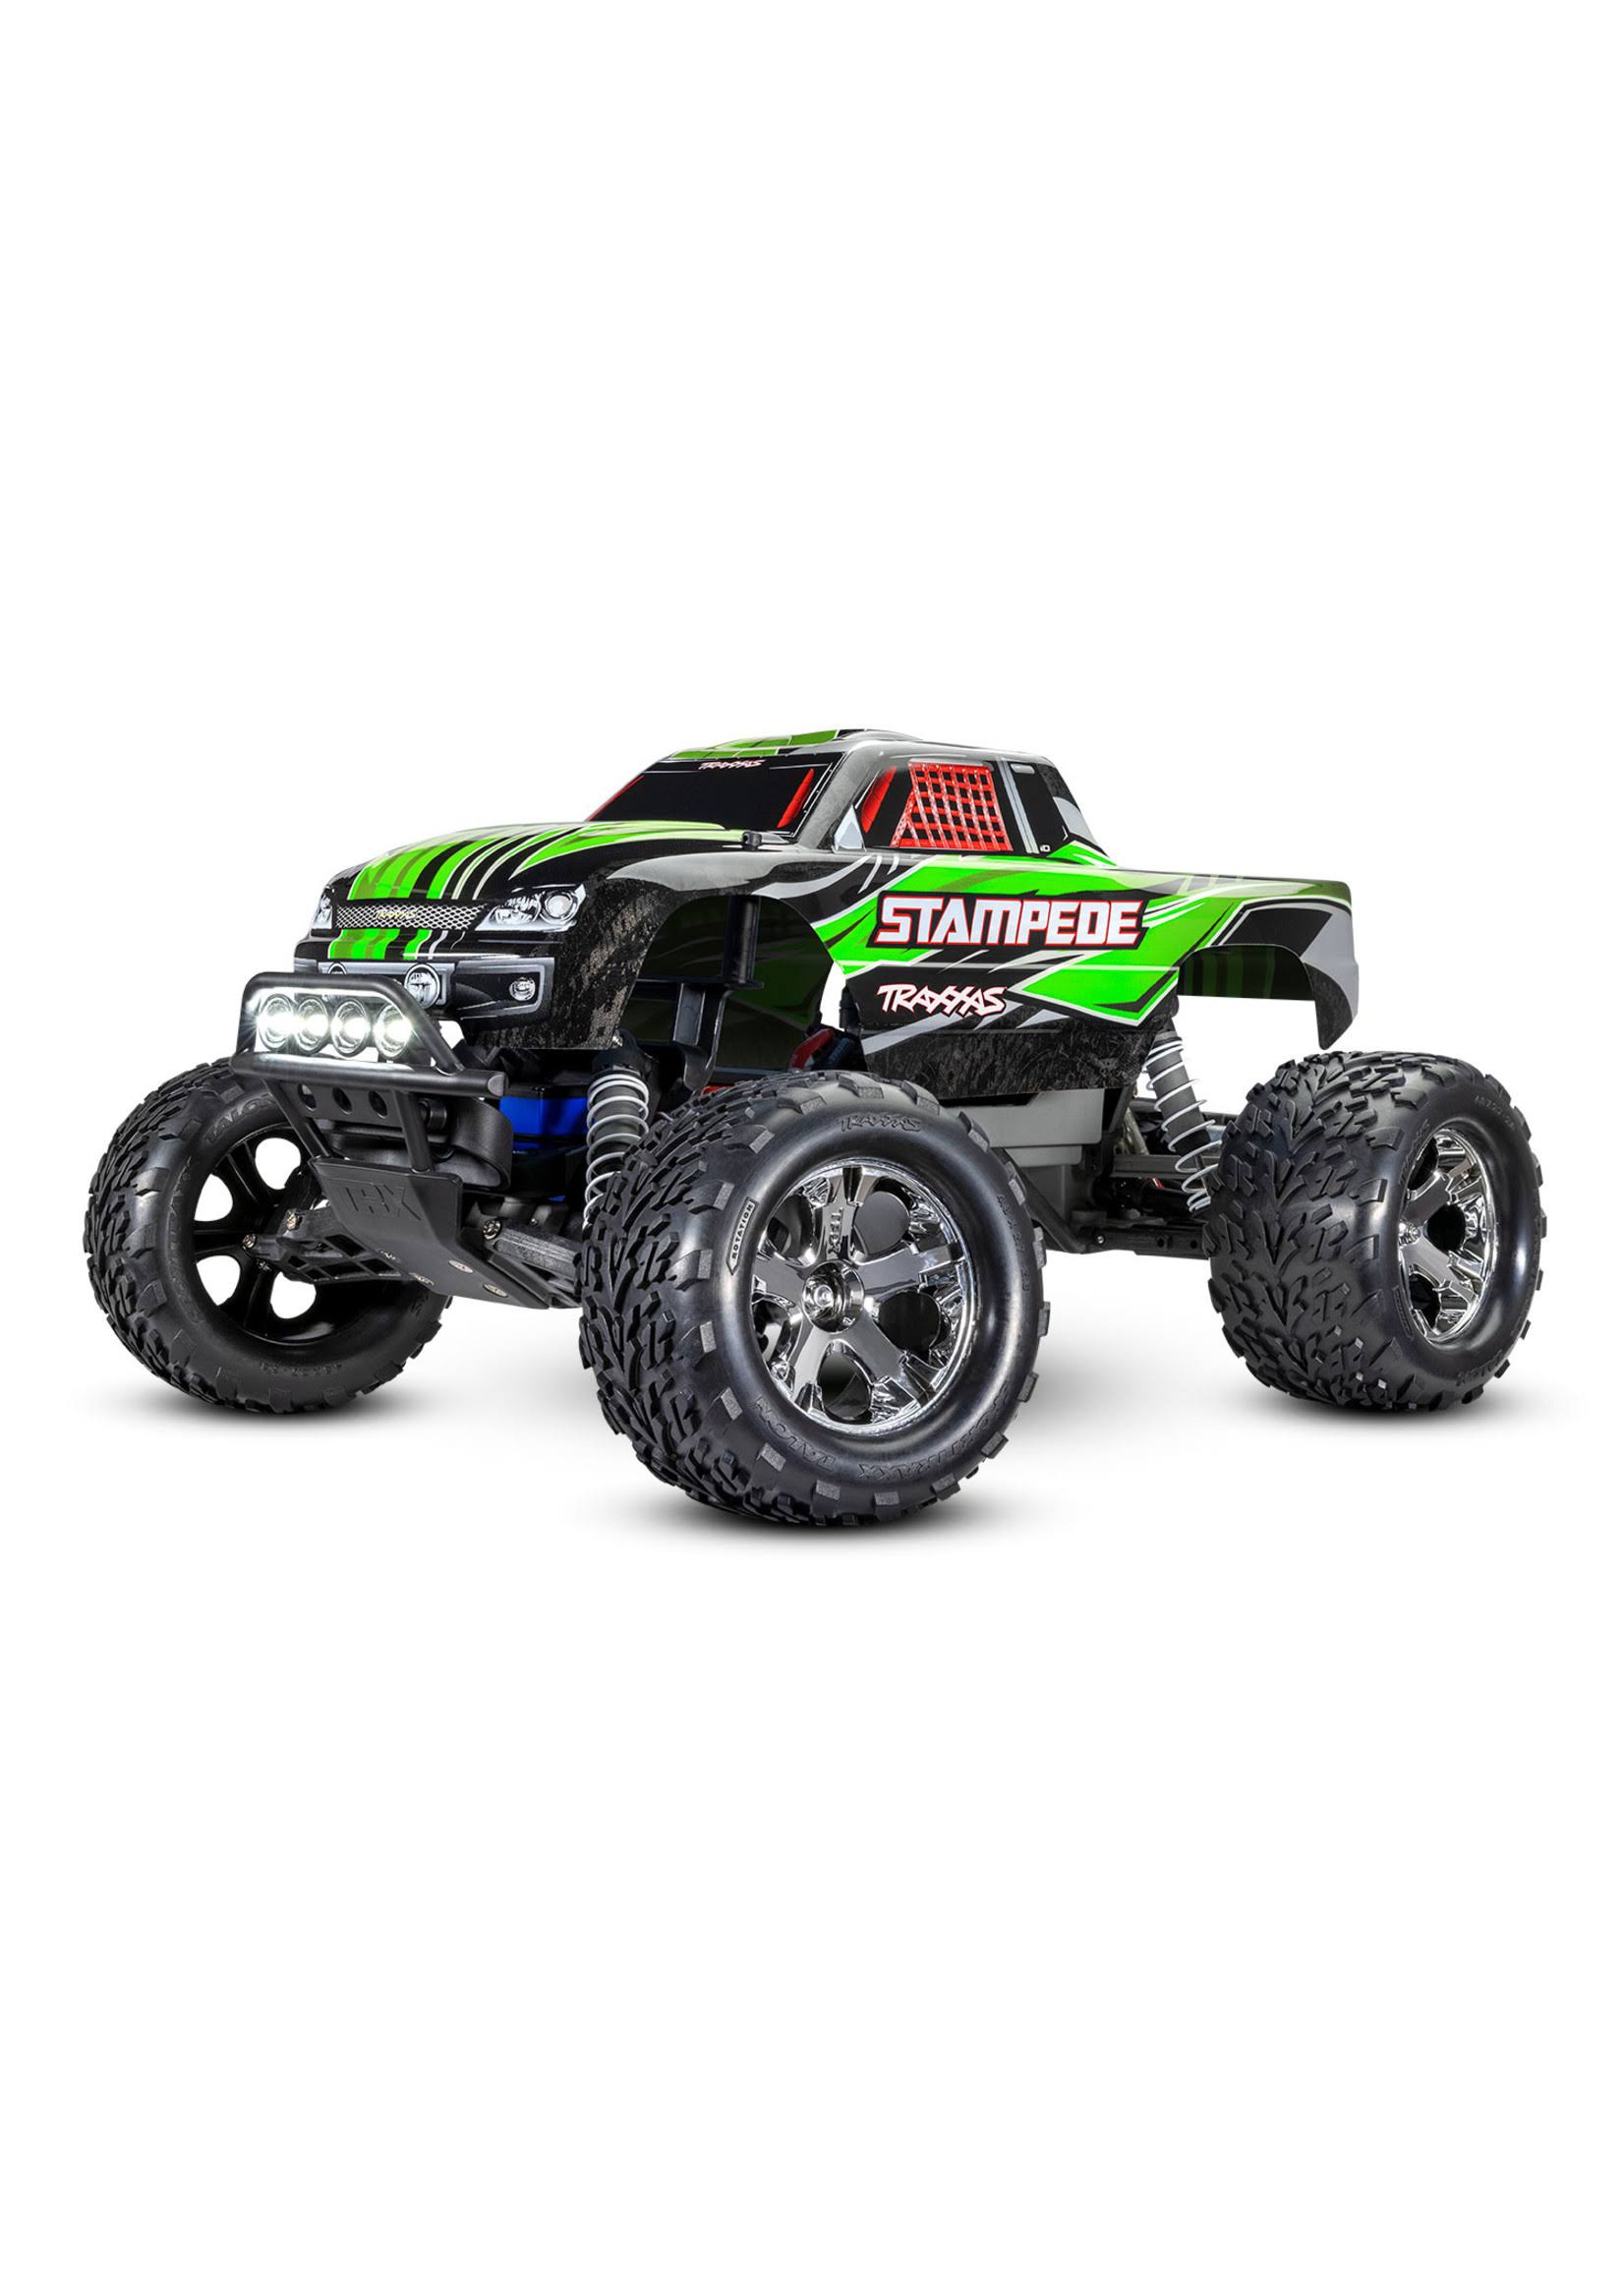 Traxxas 1/10 Stampede 2WD RTR Monster Truck with Lights - Green